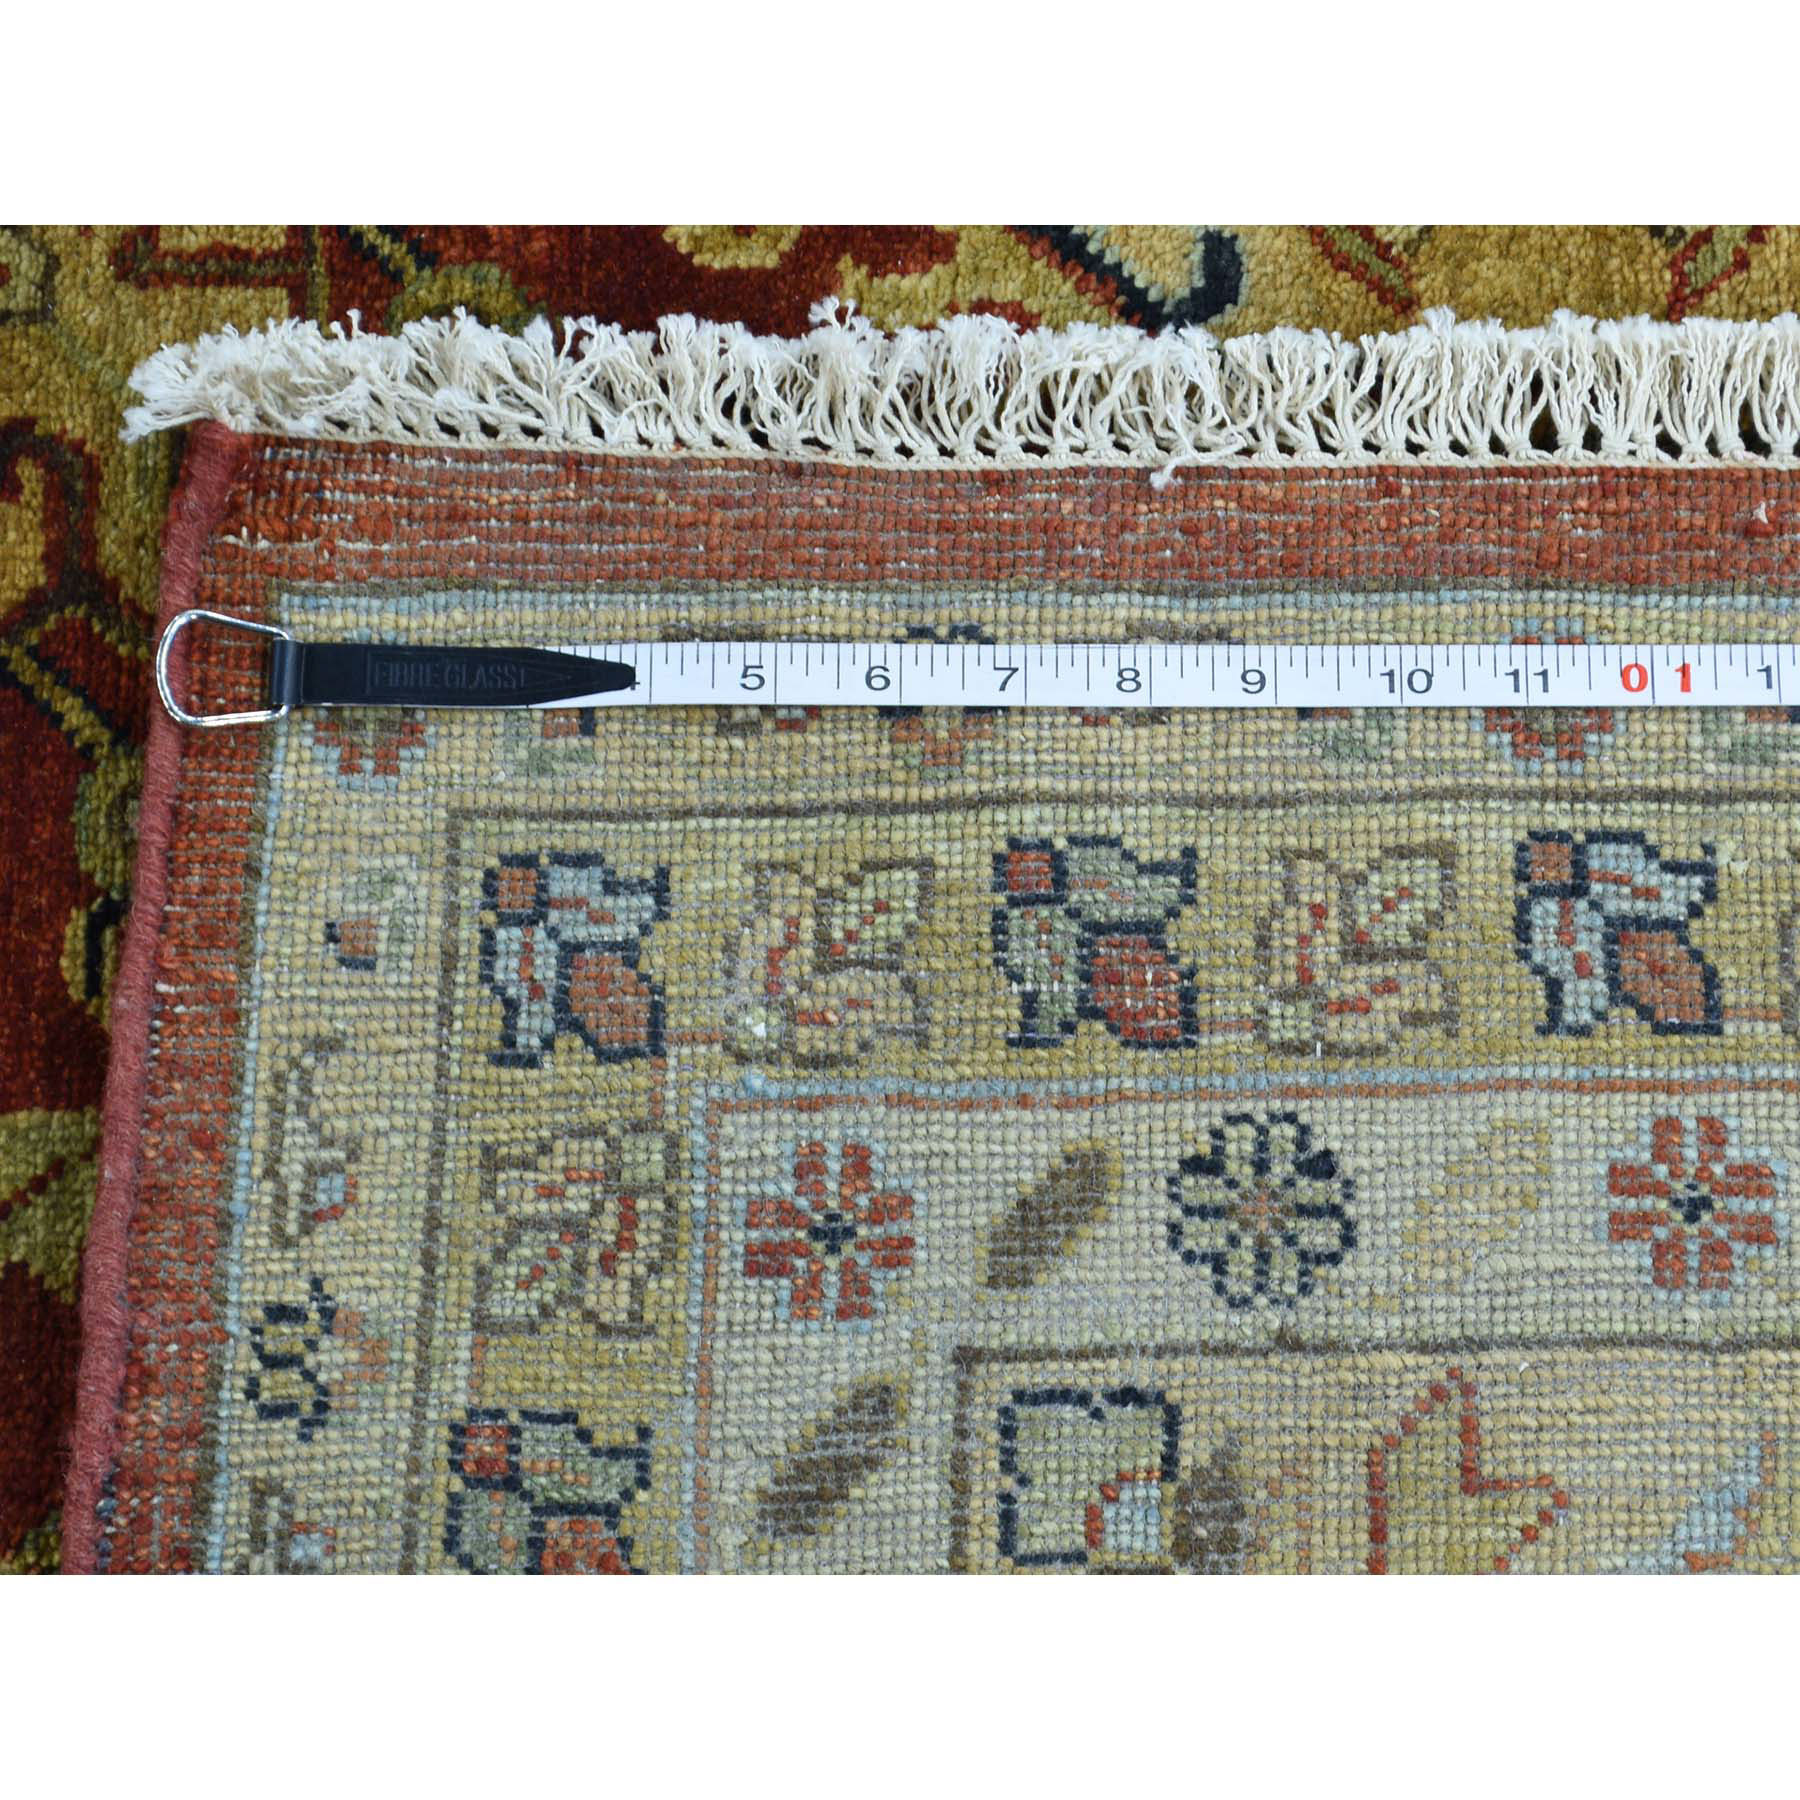 11-9 x15- Hand-Knotted 100 Percent Wool Karajeh Oversize Oriental Rug 